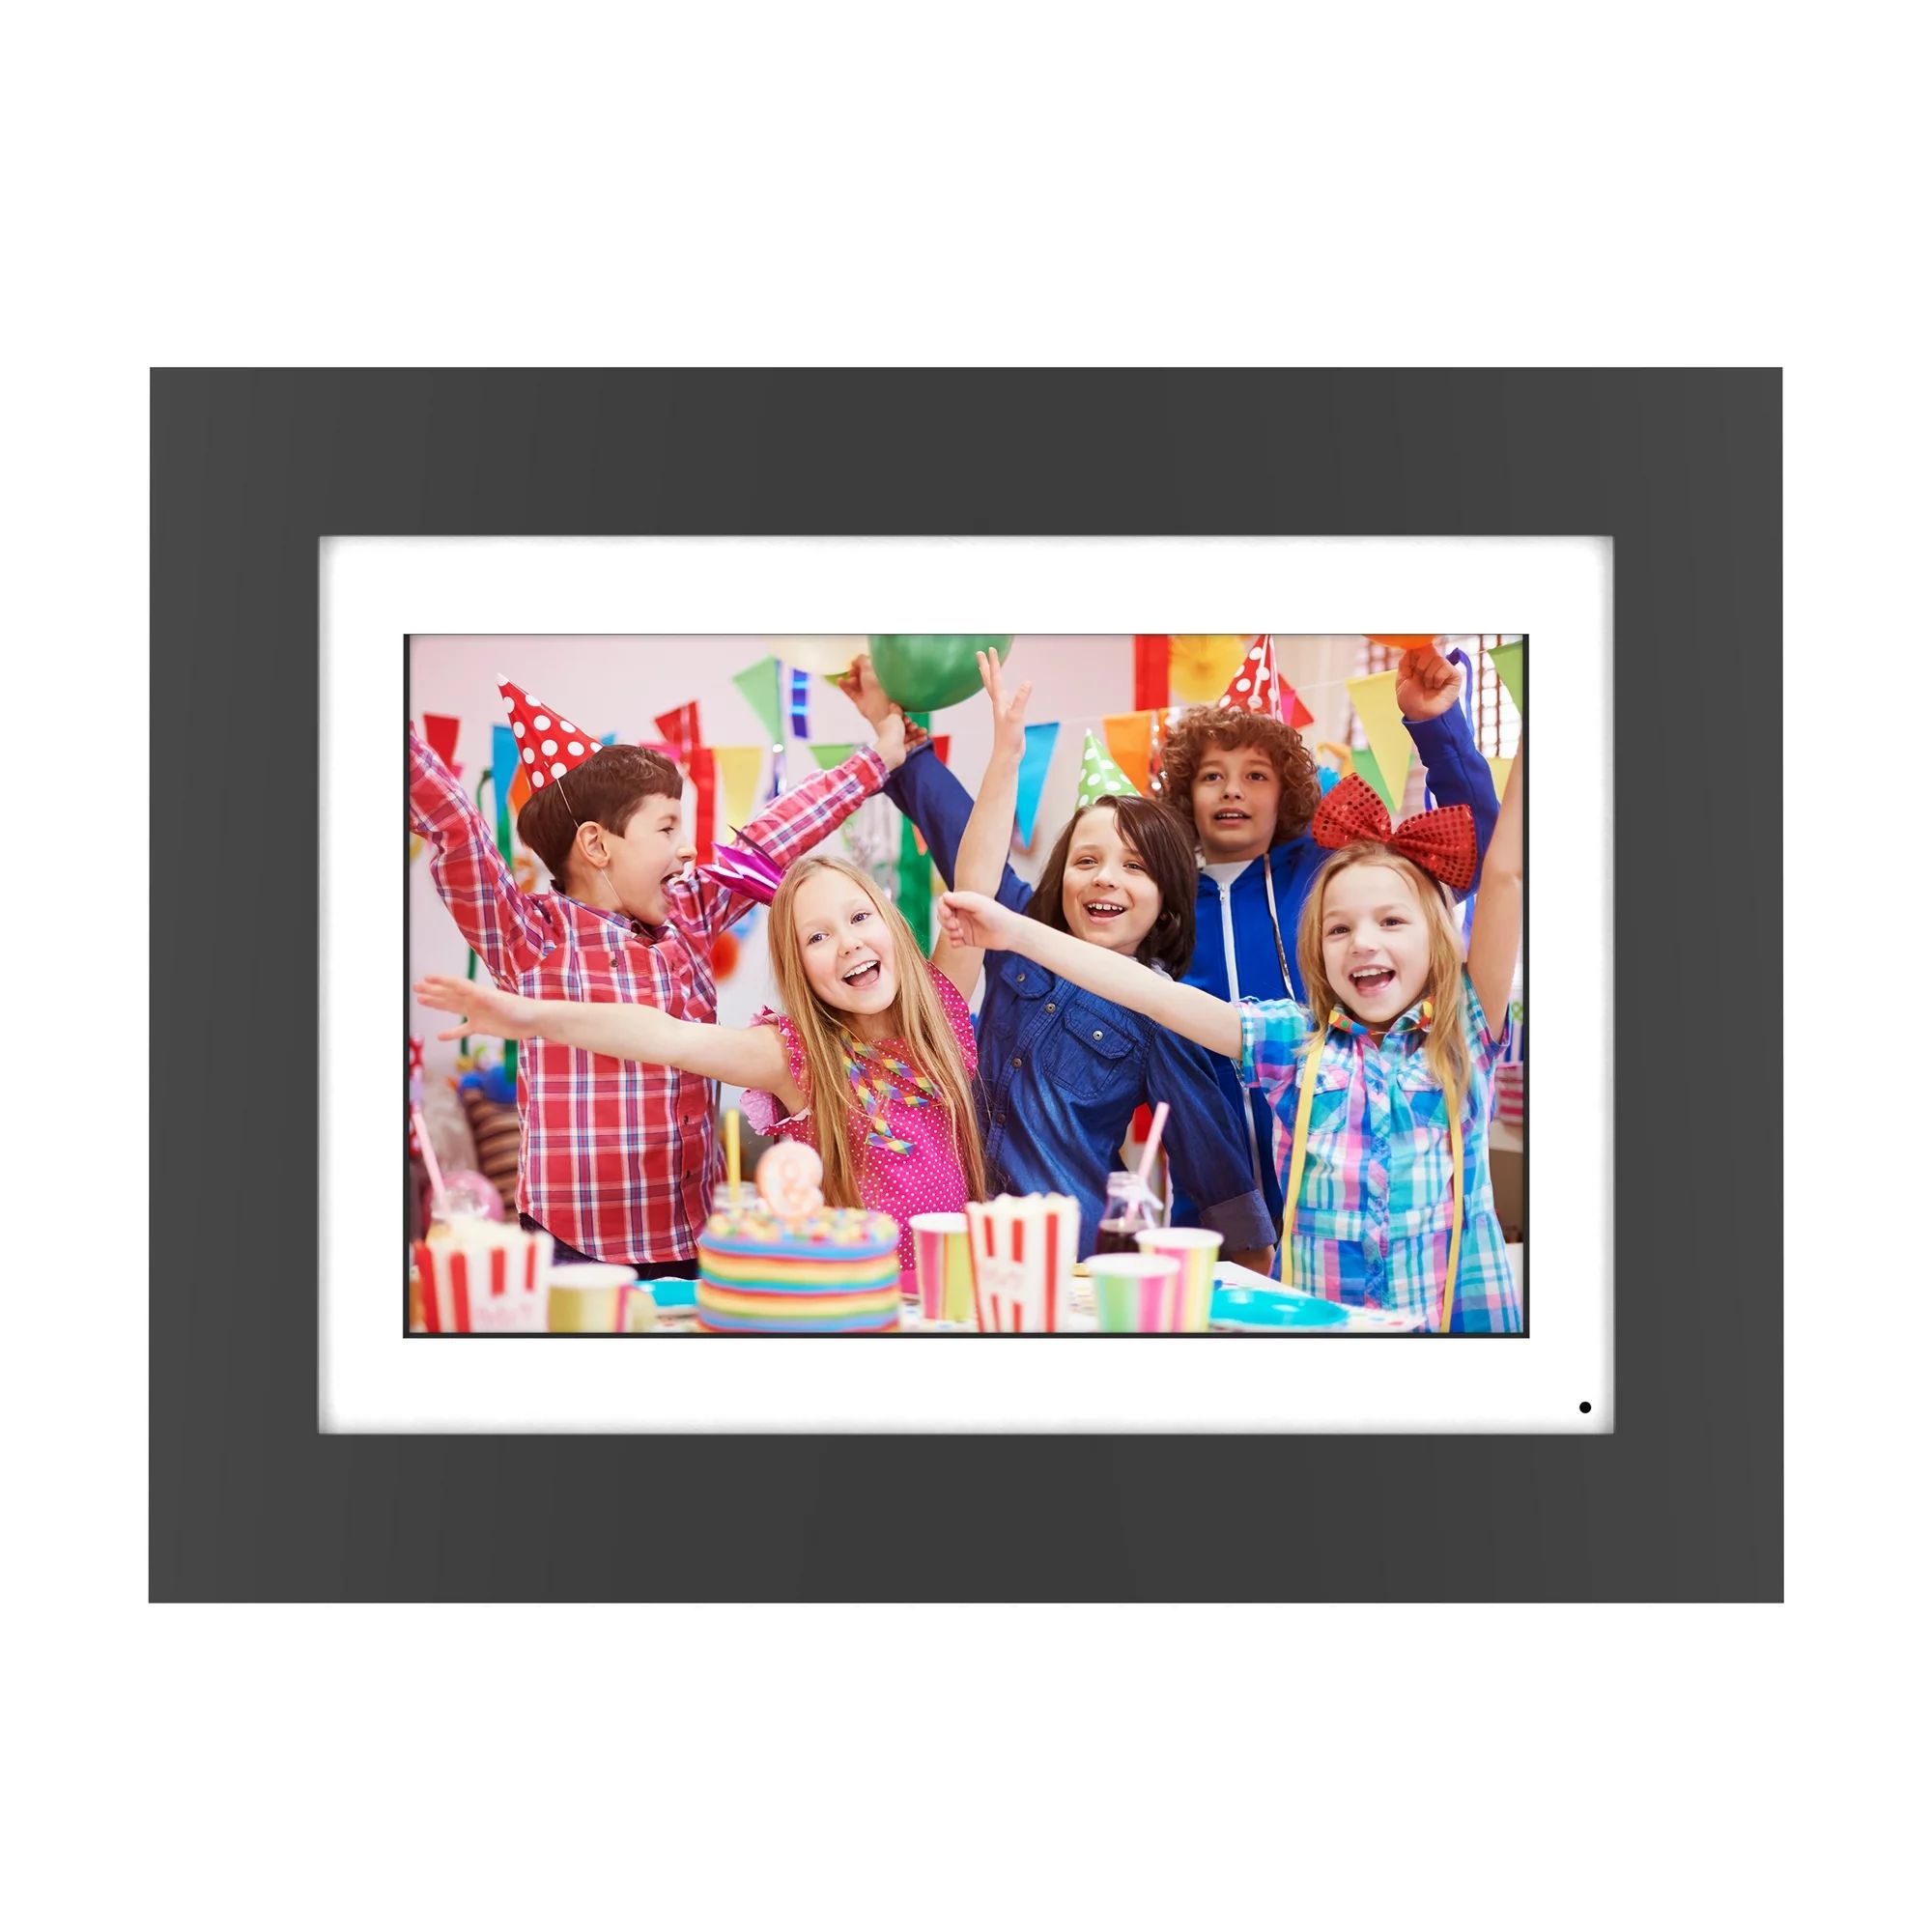 Simplysmart Home Friends And Family 10.1” Wi-Fi Smart Digital Picture Frame, Send Pictures From... | Walmart (US)